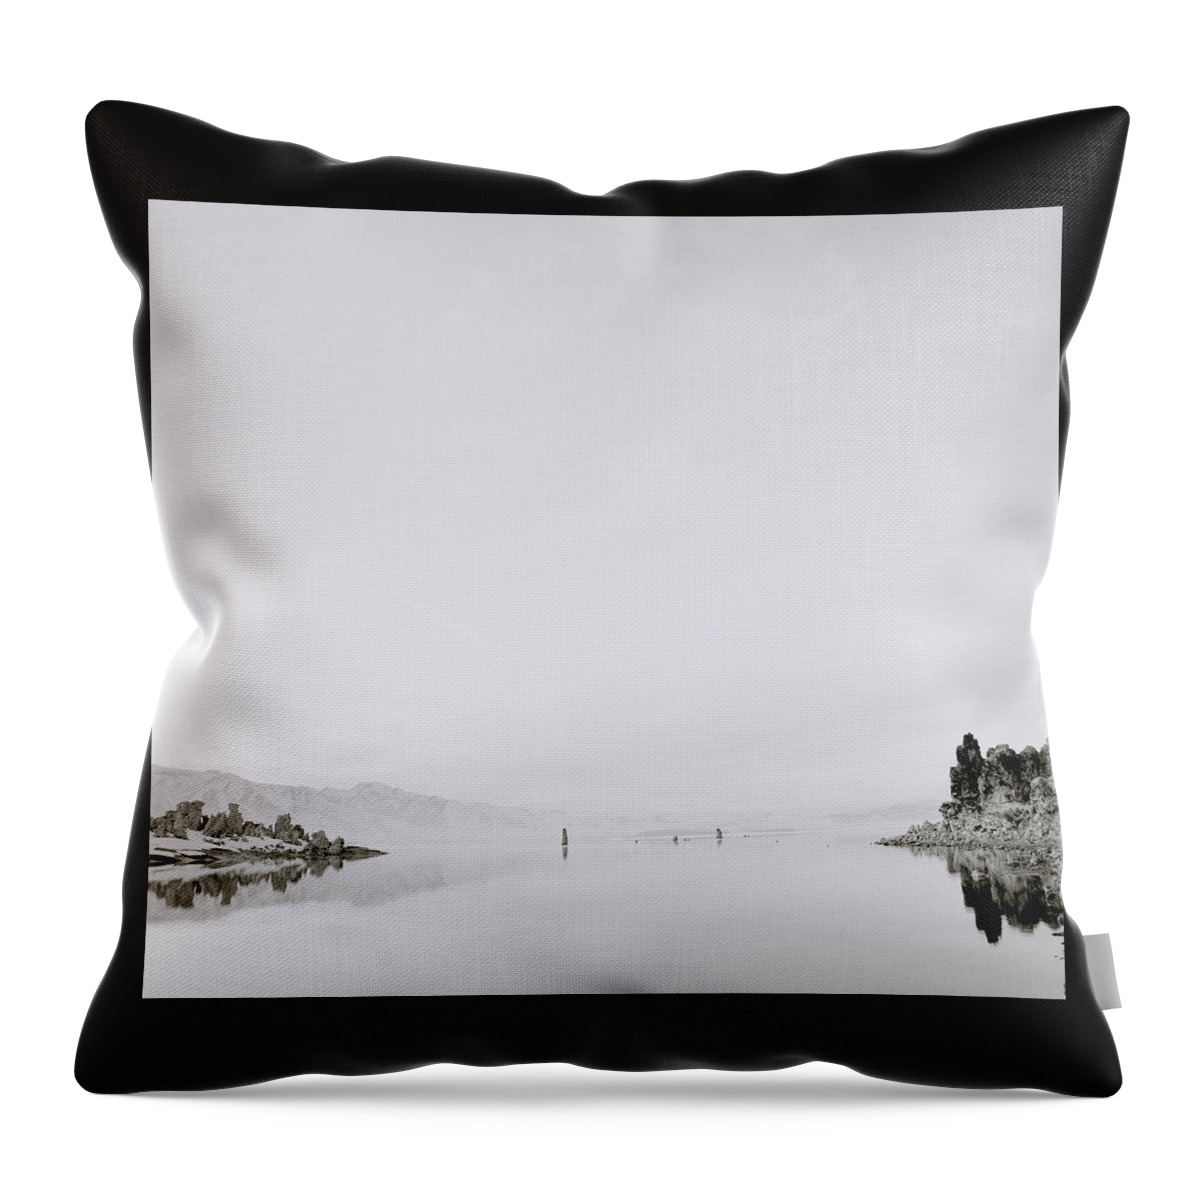 Escapism Throw Pillow featuring the photograph Still Waters Of Mono Lake In America by Shaun Higson